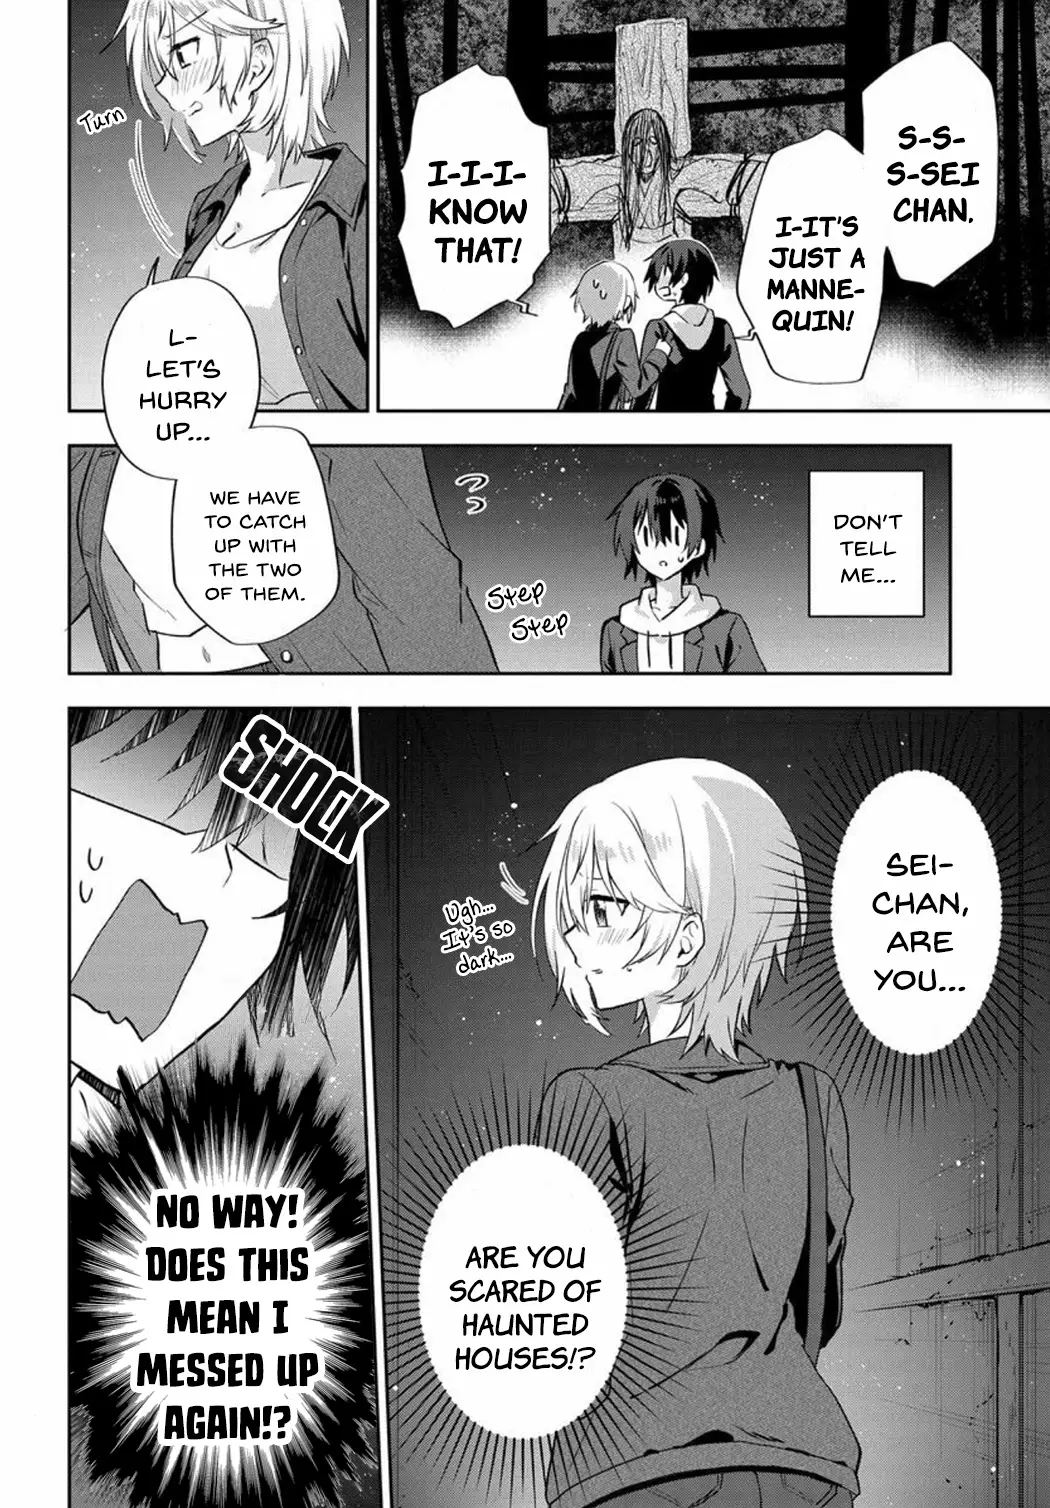 Since I’Ve Entered The World Of Romantic Comedy Manga, I’Ll Do My Best To Make The Losing Heroine Happy - 7.2 page 7-97431041